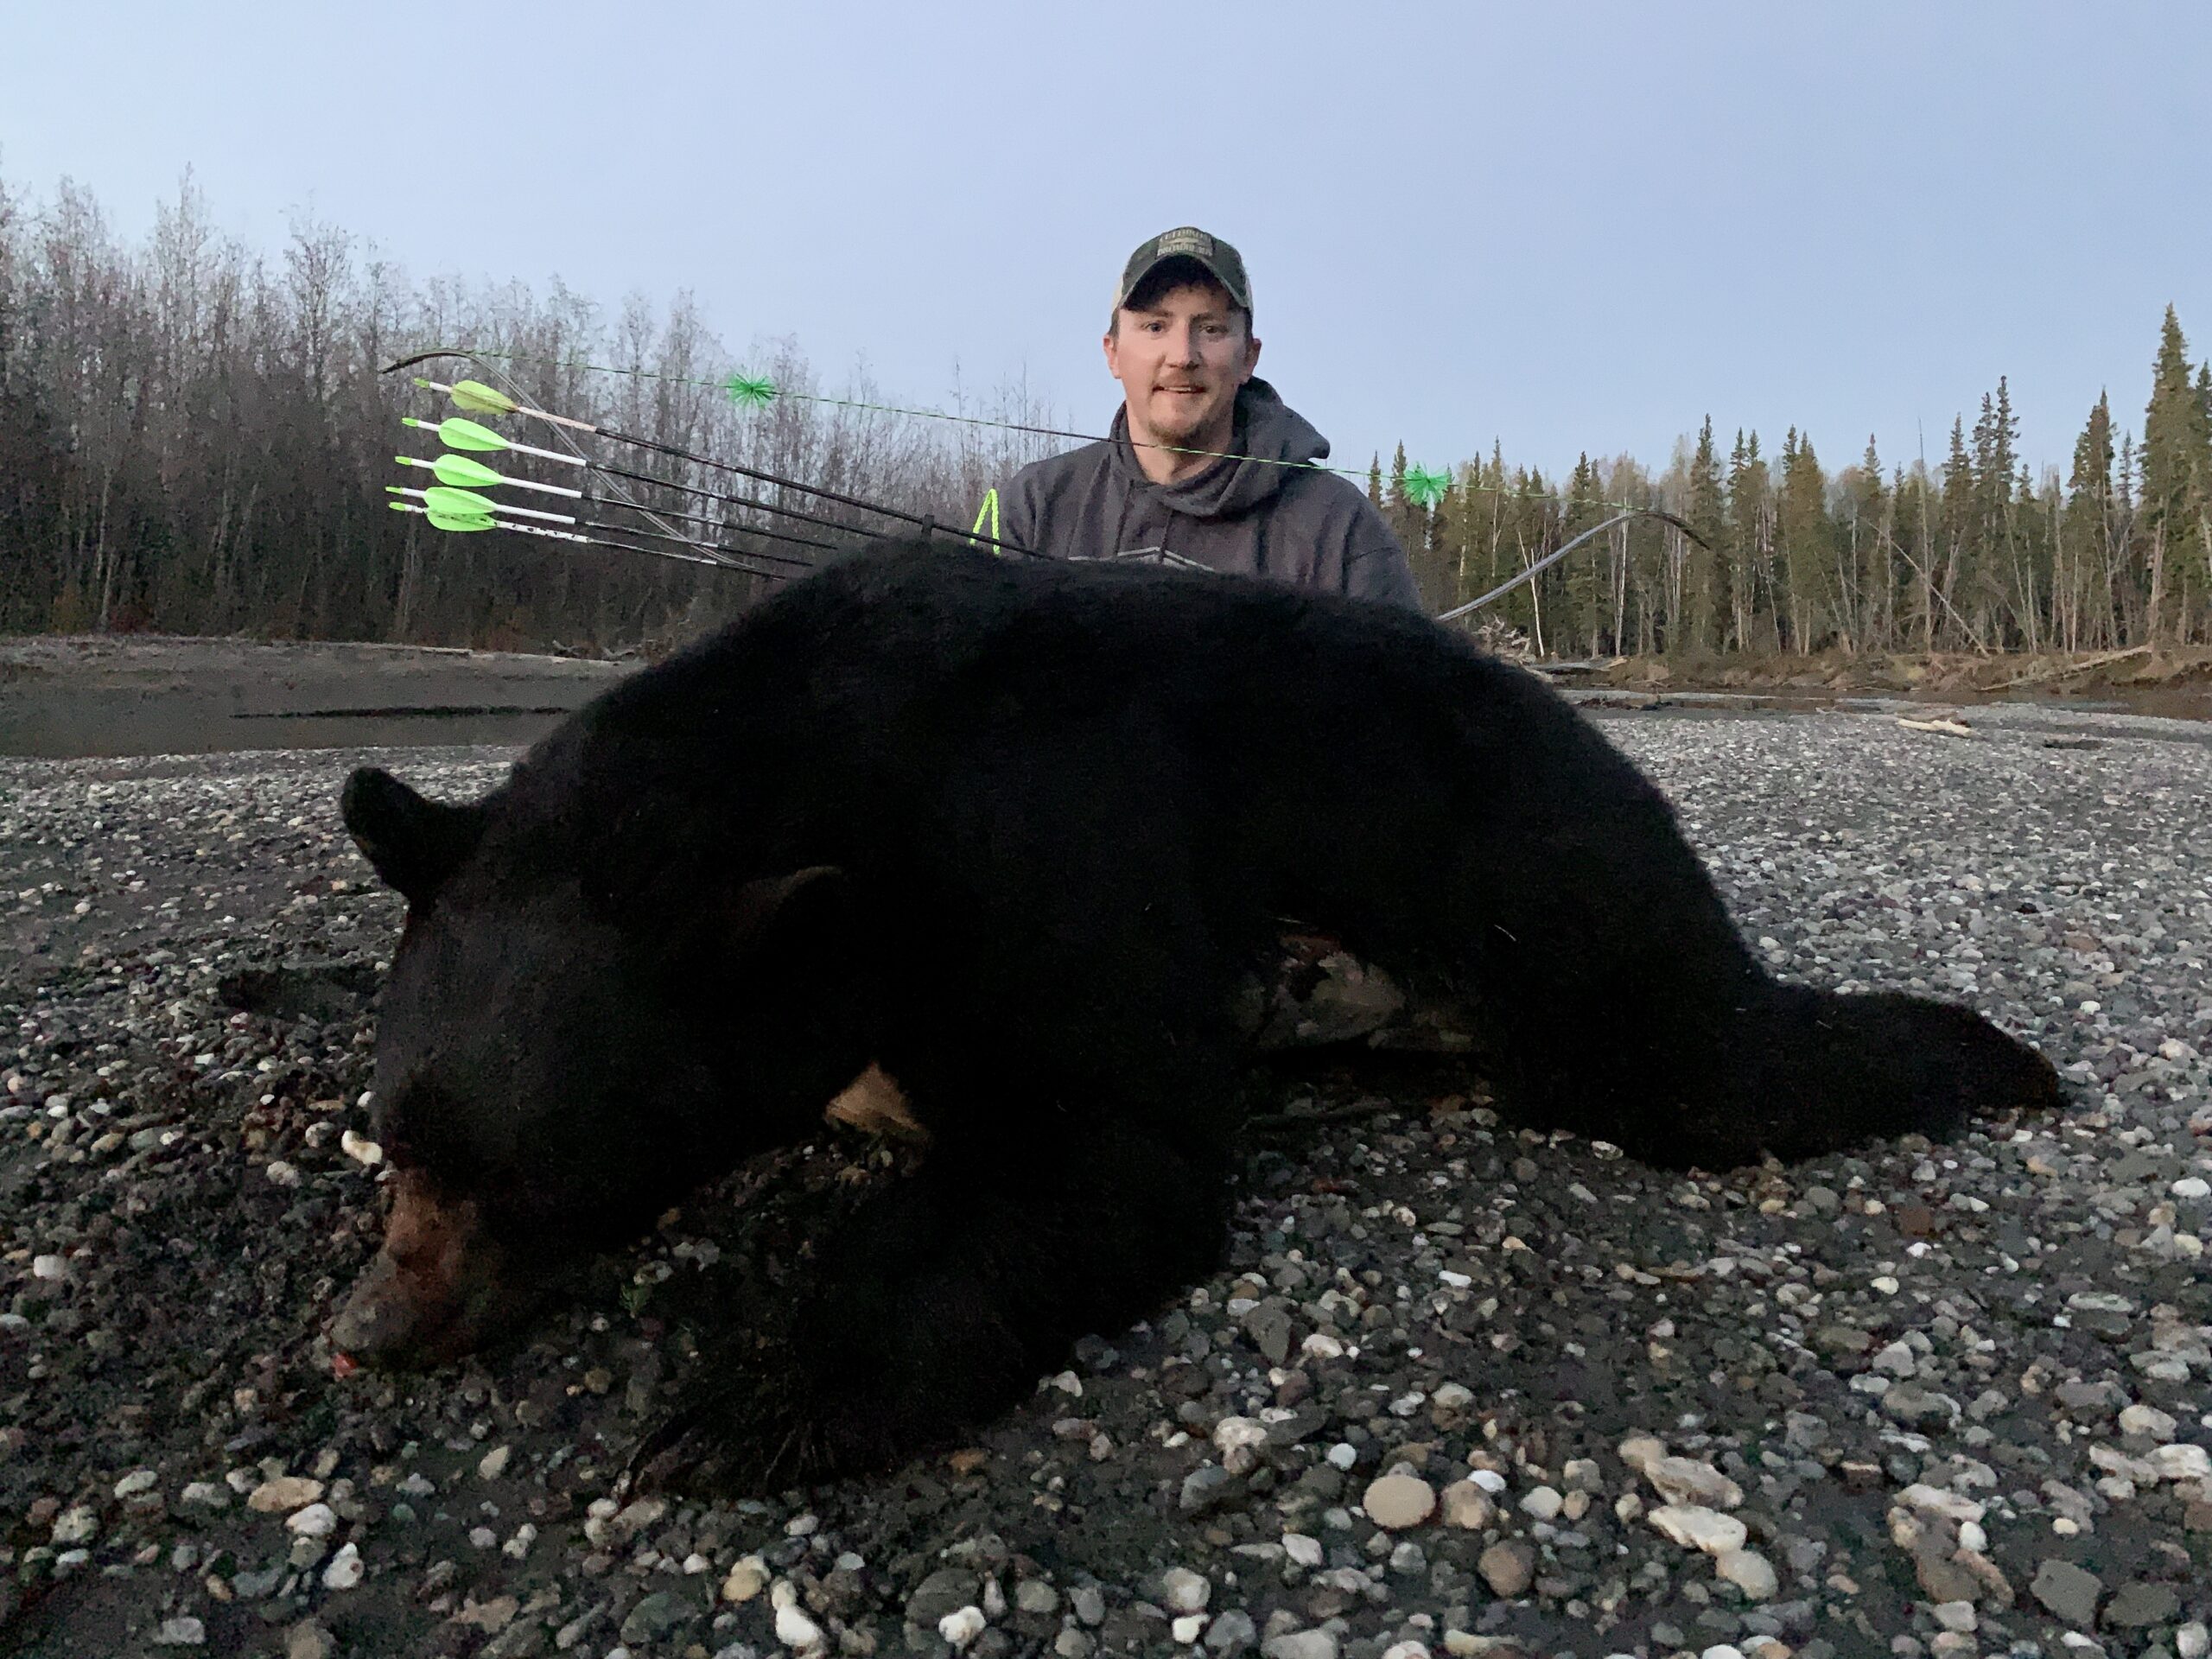 Keys to Making Good Archery Shots on Bears (and Recovering Them Quickly)